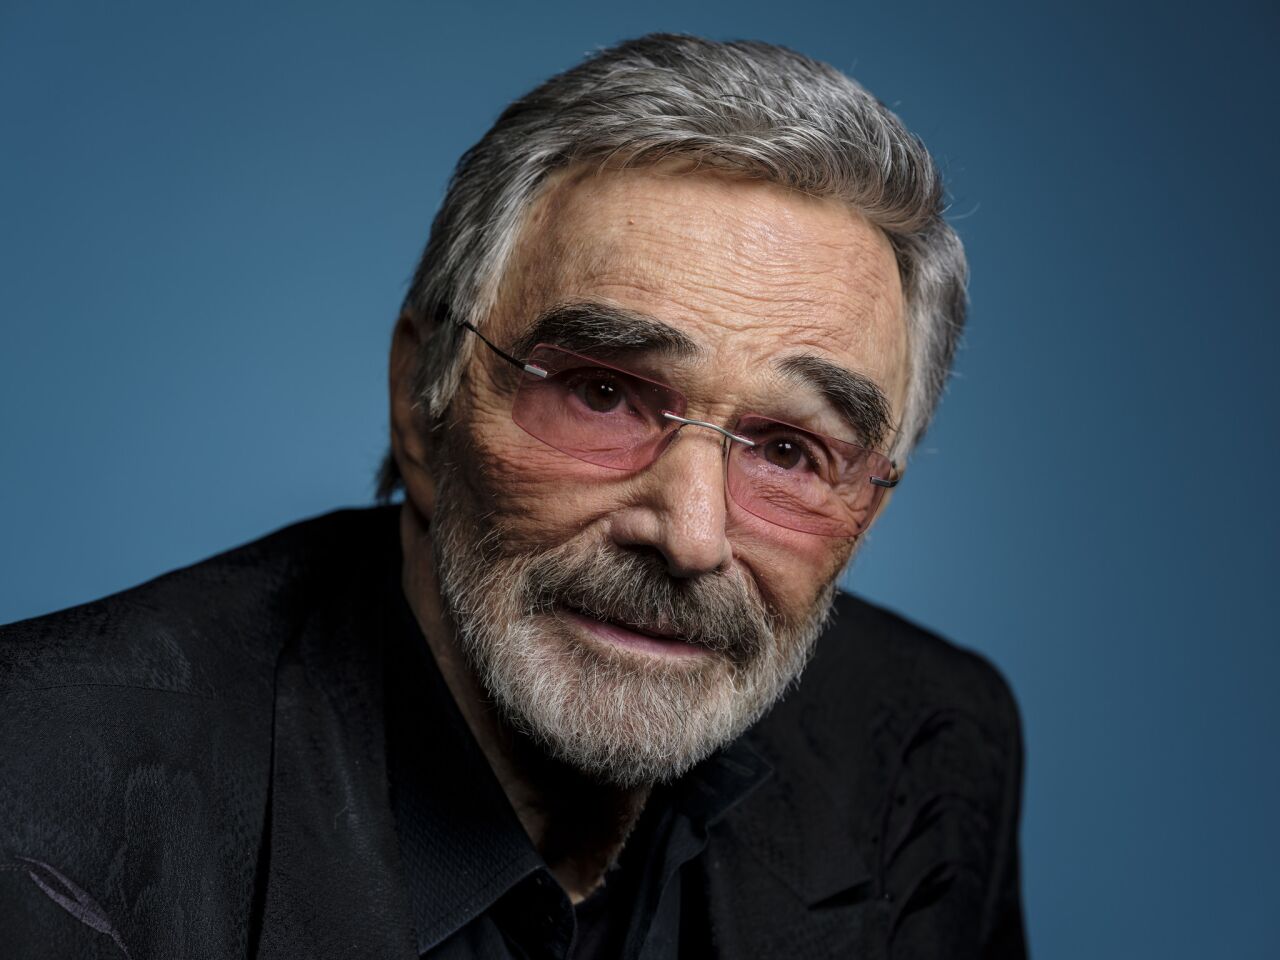 Burt Reynolds sits for a portrait as he promotes his role in "The Last Movie Star" in Beverly Hills on March 21, 2018.